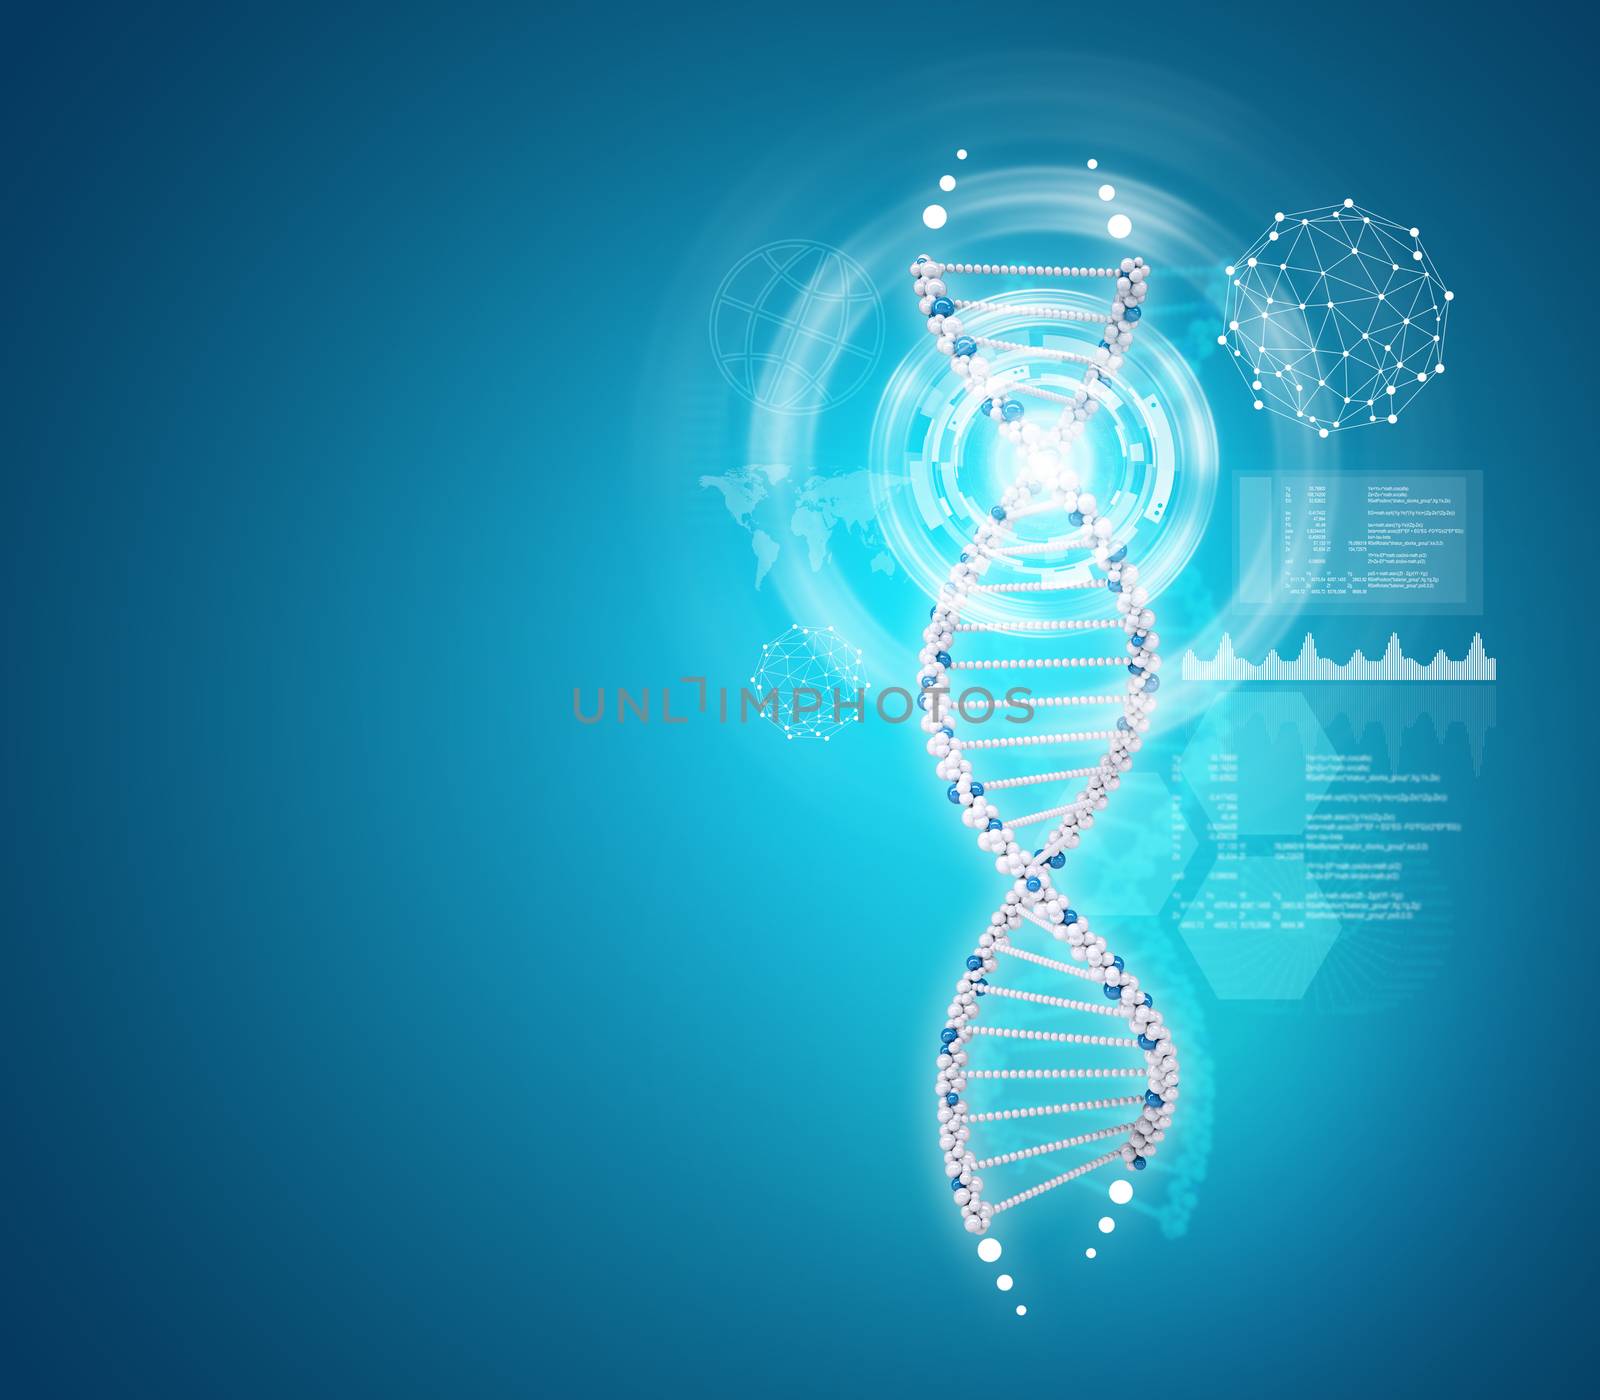 Human DNA. Background of white ring with hexagon and information board by cherezoff